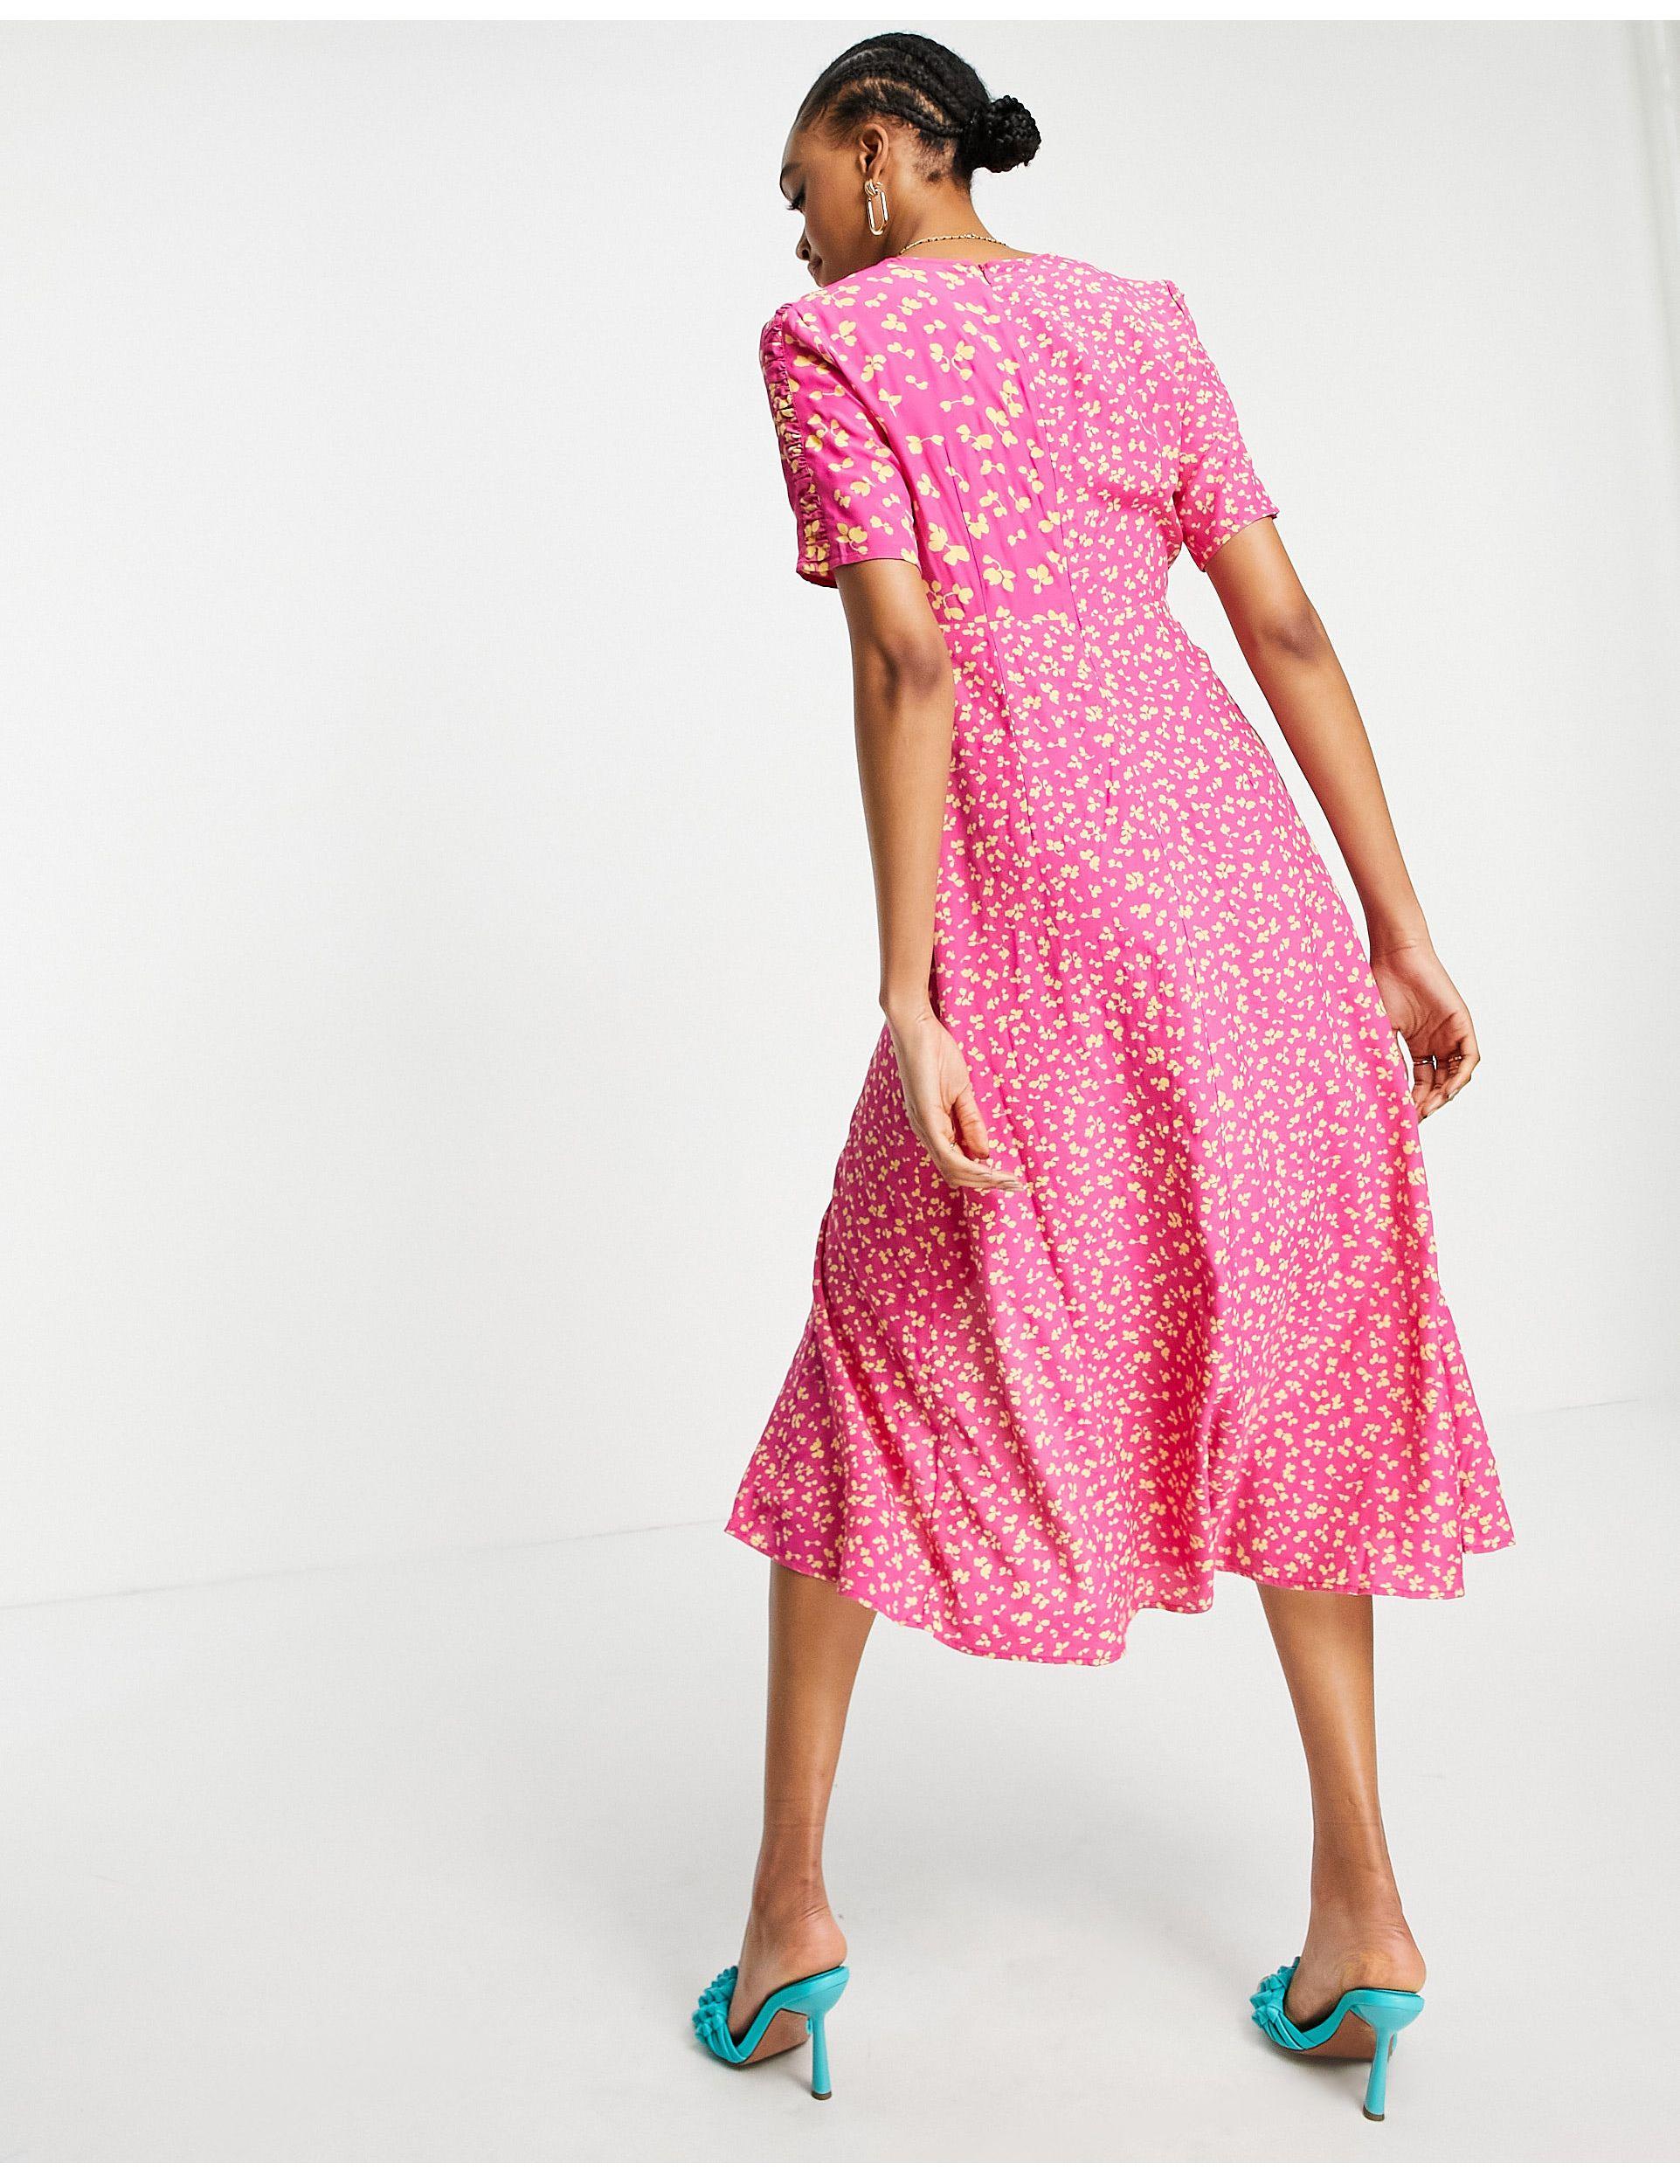 French Connection Bonita Mixed Print Midi Dress in Pink - Lyst